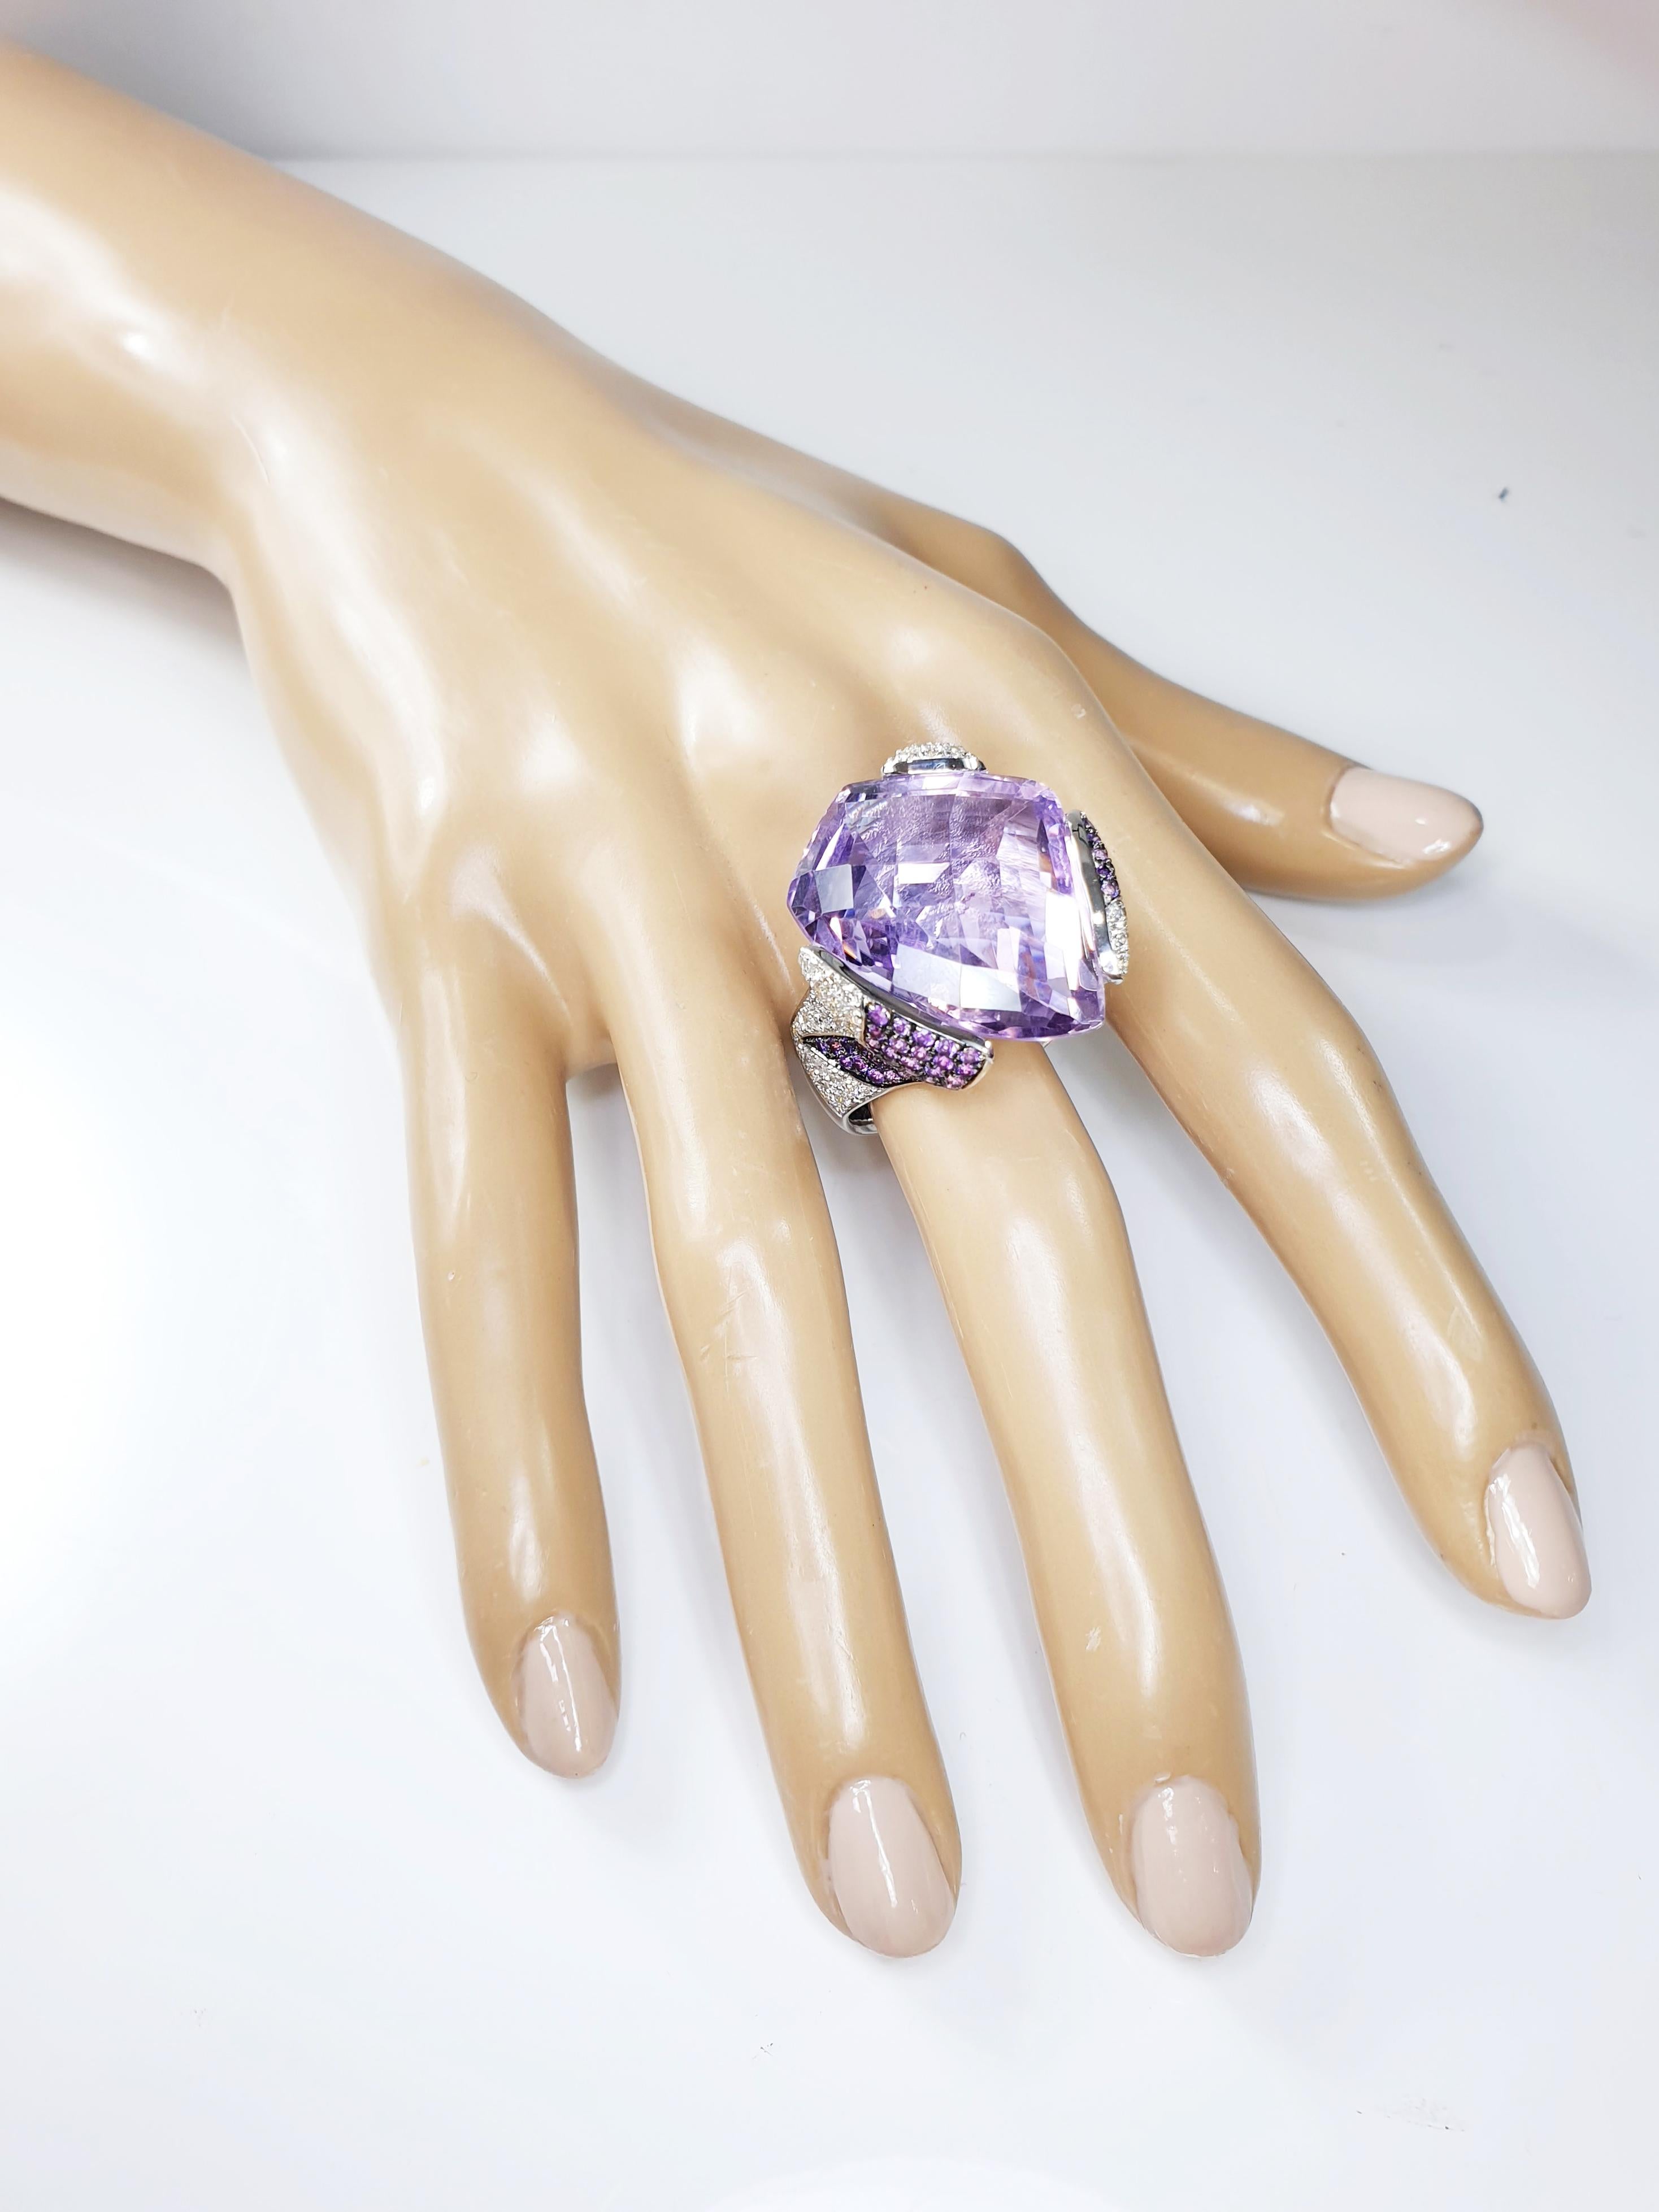 Hexagon Cut Multifaceted 32 Carat Amethyst with Diamonds and 18 Karat White Gold Ring For Sale